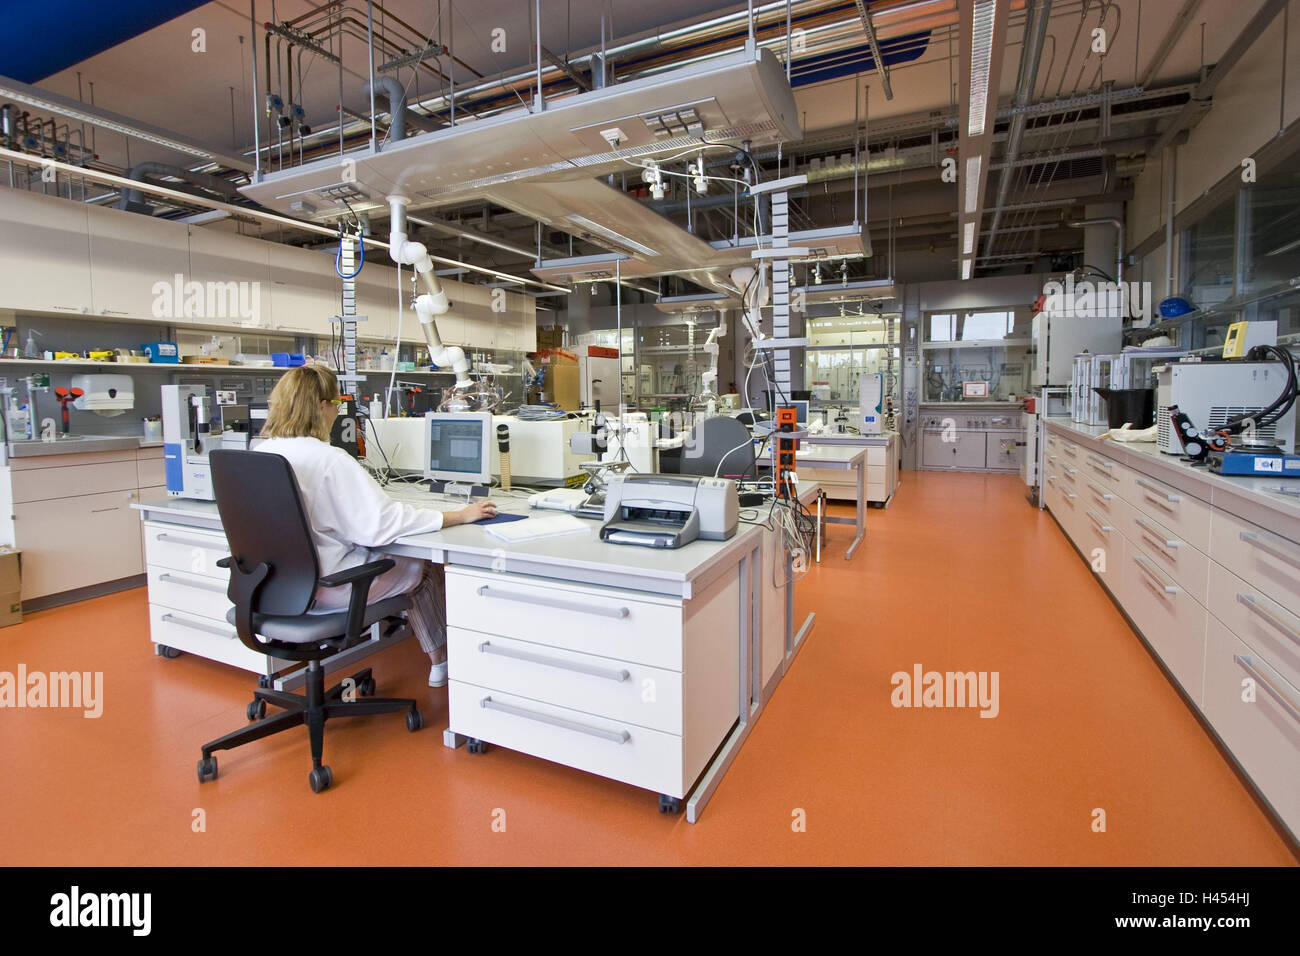 Laboratory, scientist, view, display, results analysis, Germany, North Rhine-Westphalia, Marl, Evonik, chemicals company, company, nanotechnology, Nanotronics, chemistry, special chemistry, occupation, work, research, development, data analysis, analysis, evaluation, results, laboratory examination, examination, science, woman, researcher, person, industry, technology, Stock Photo